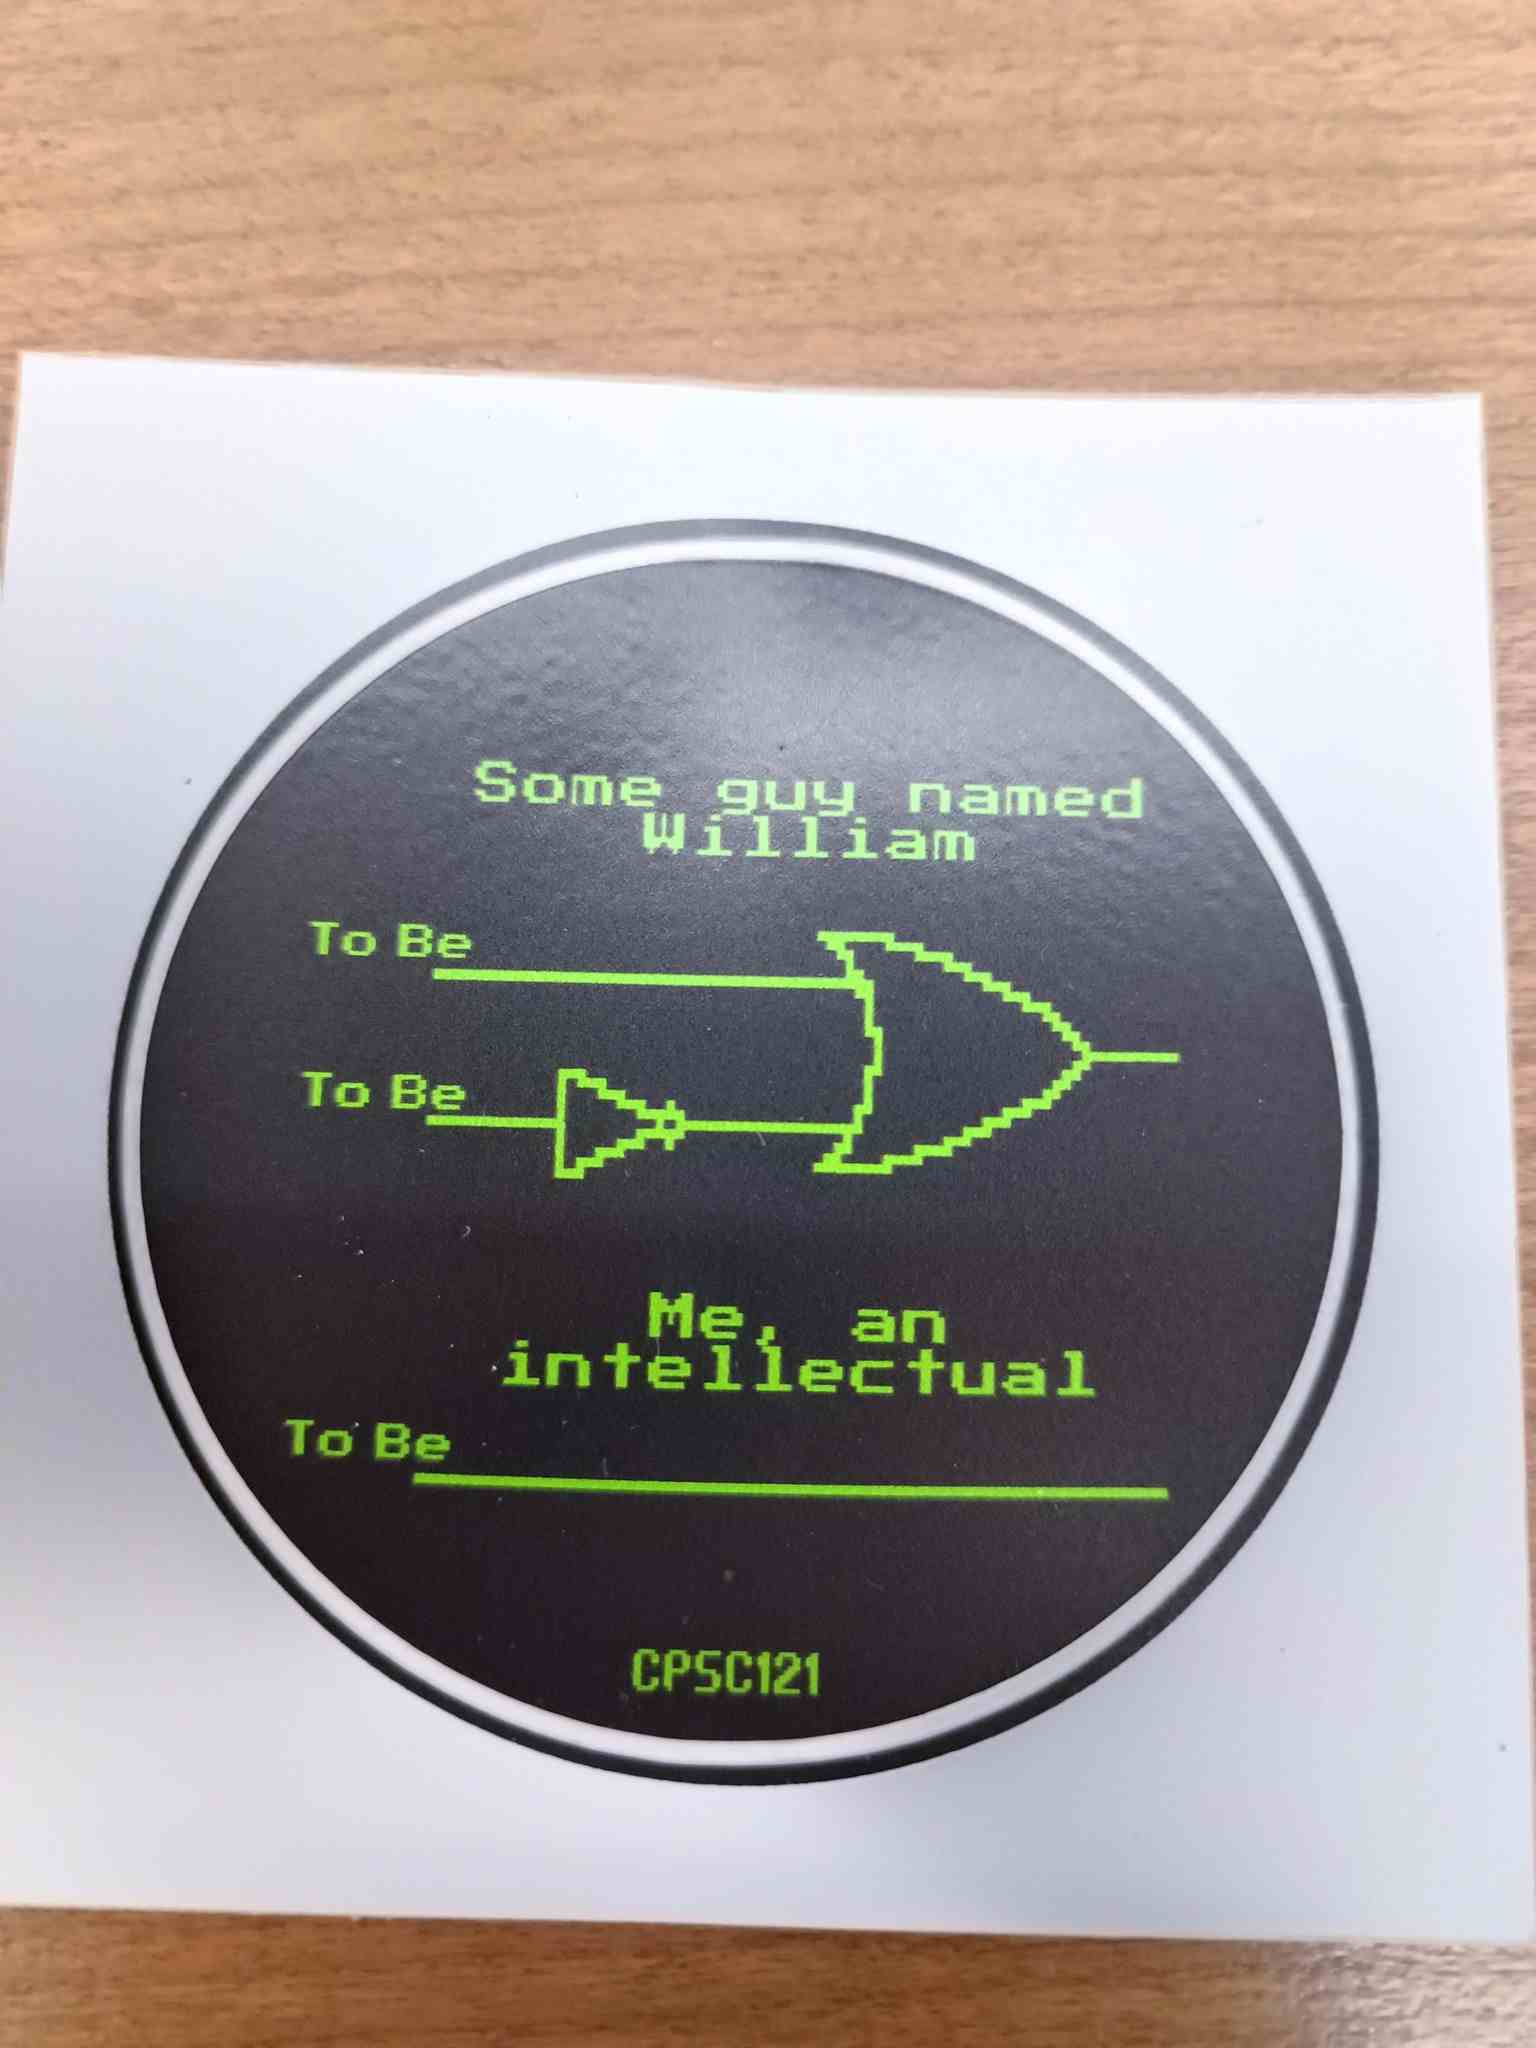 Got this sticker in my computer science class today